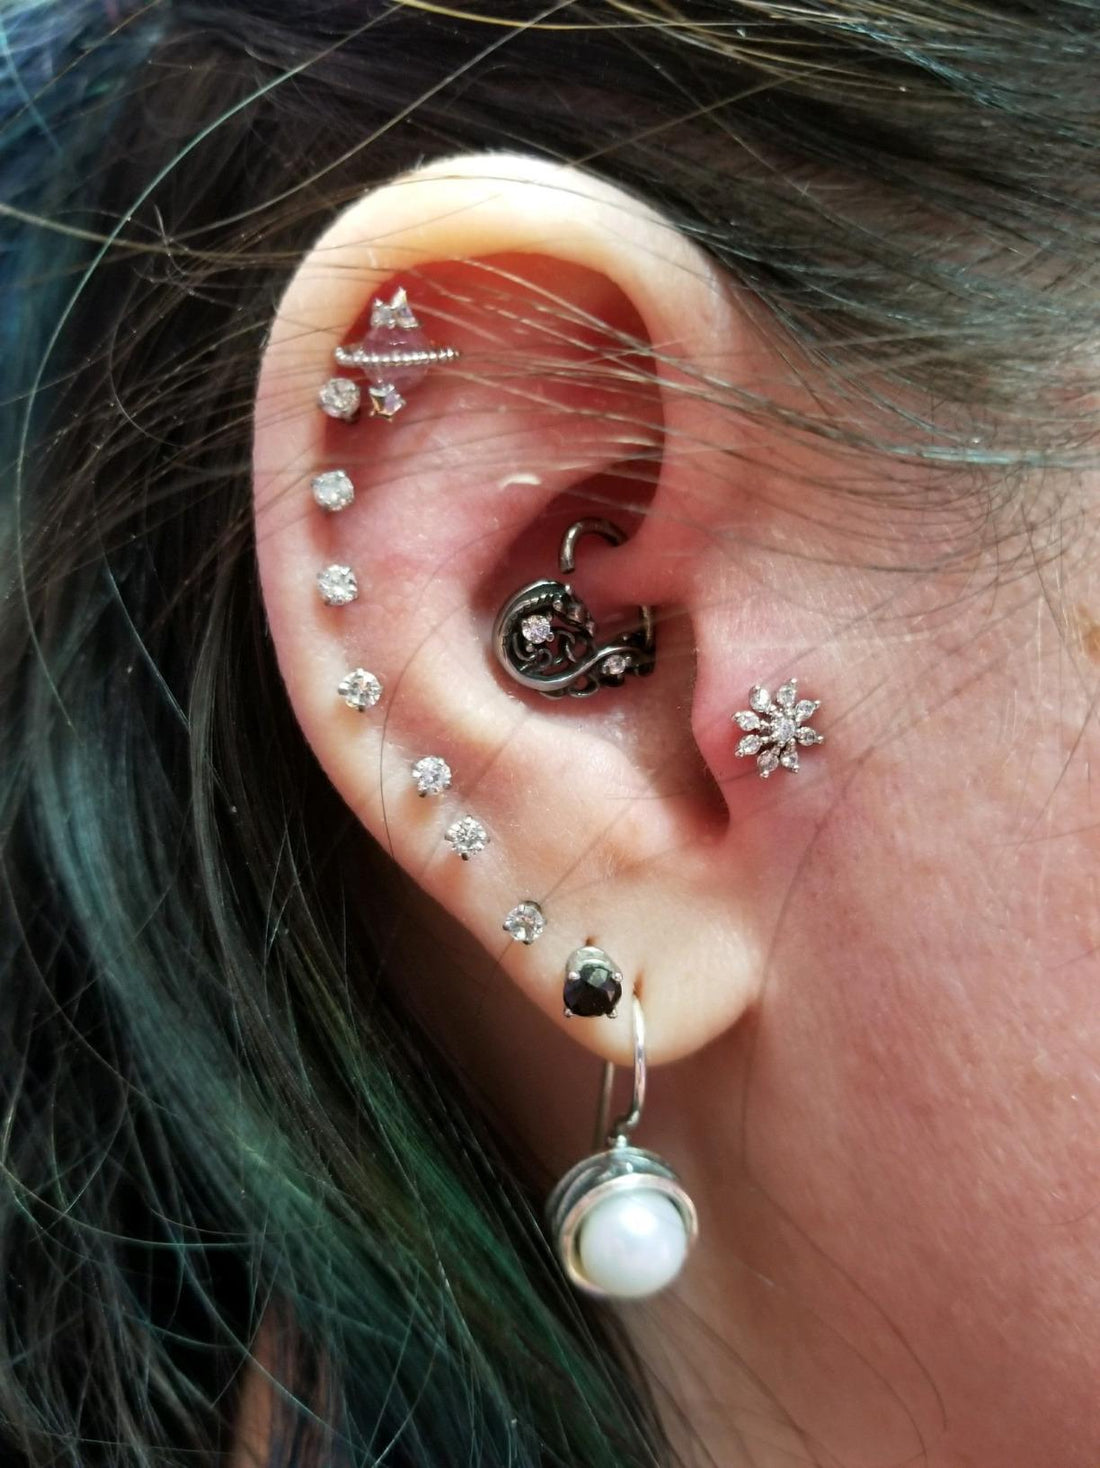 What are the different ear piercings called?